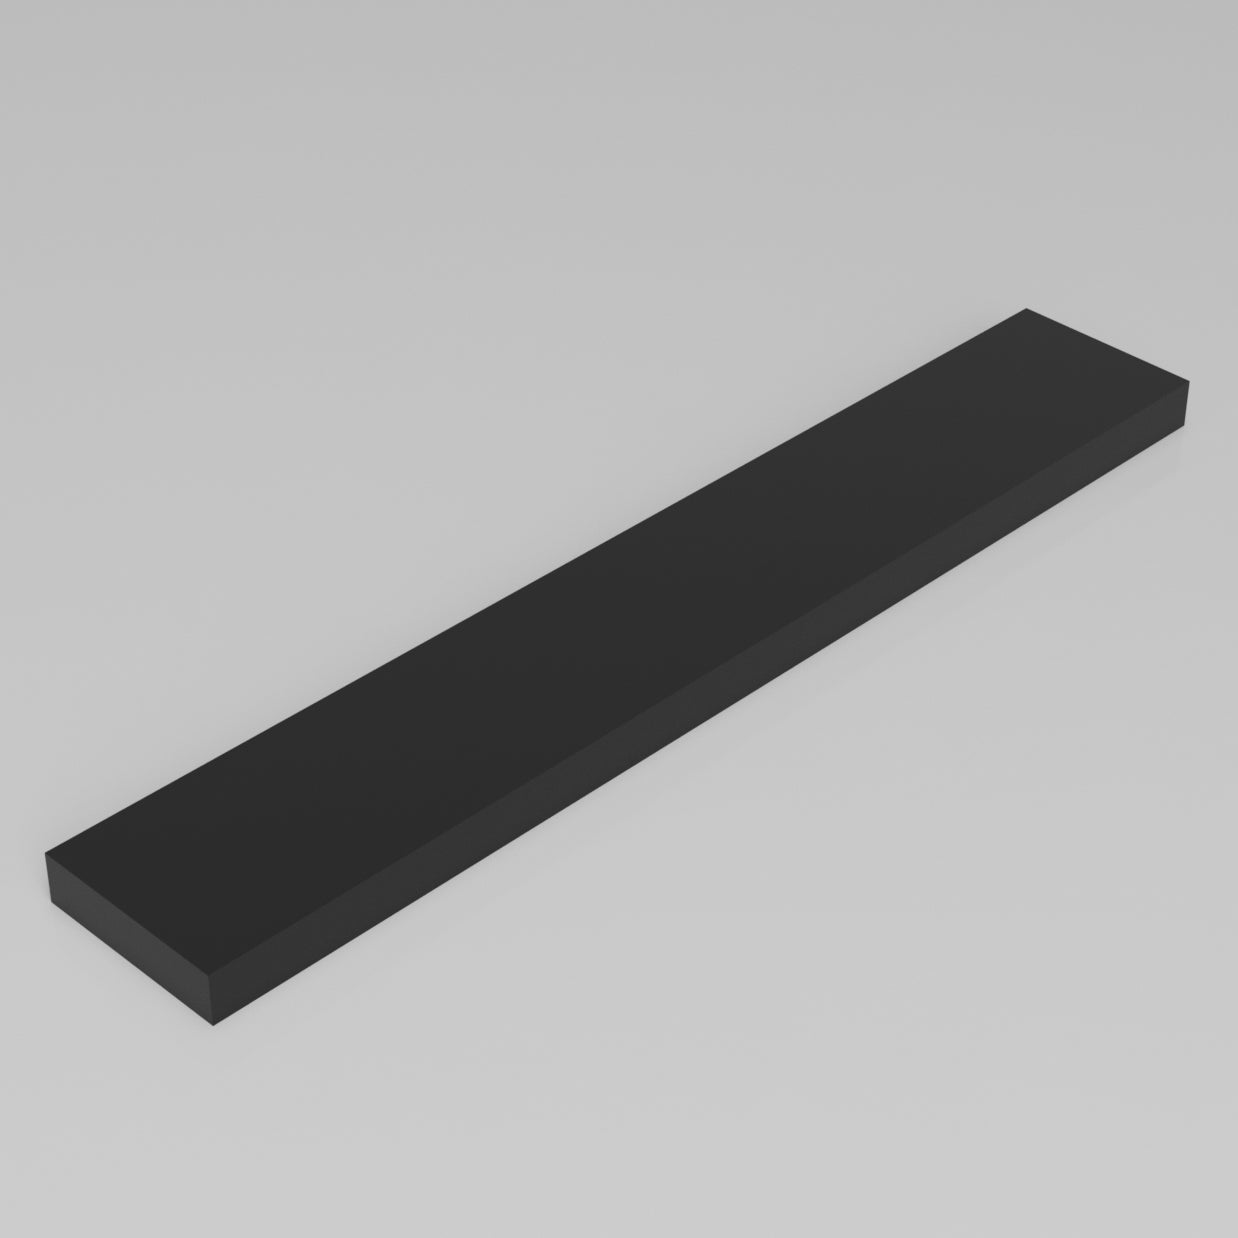 Machinable Wax Rectangular Block Front View 1 Inch by 4 Inch by 24 Inch